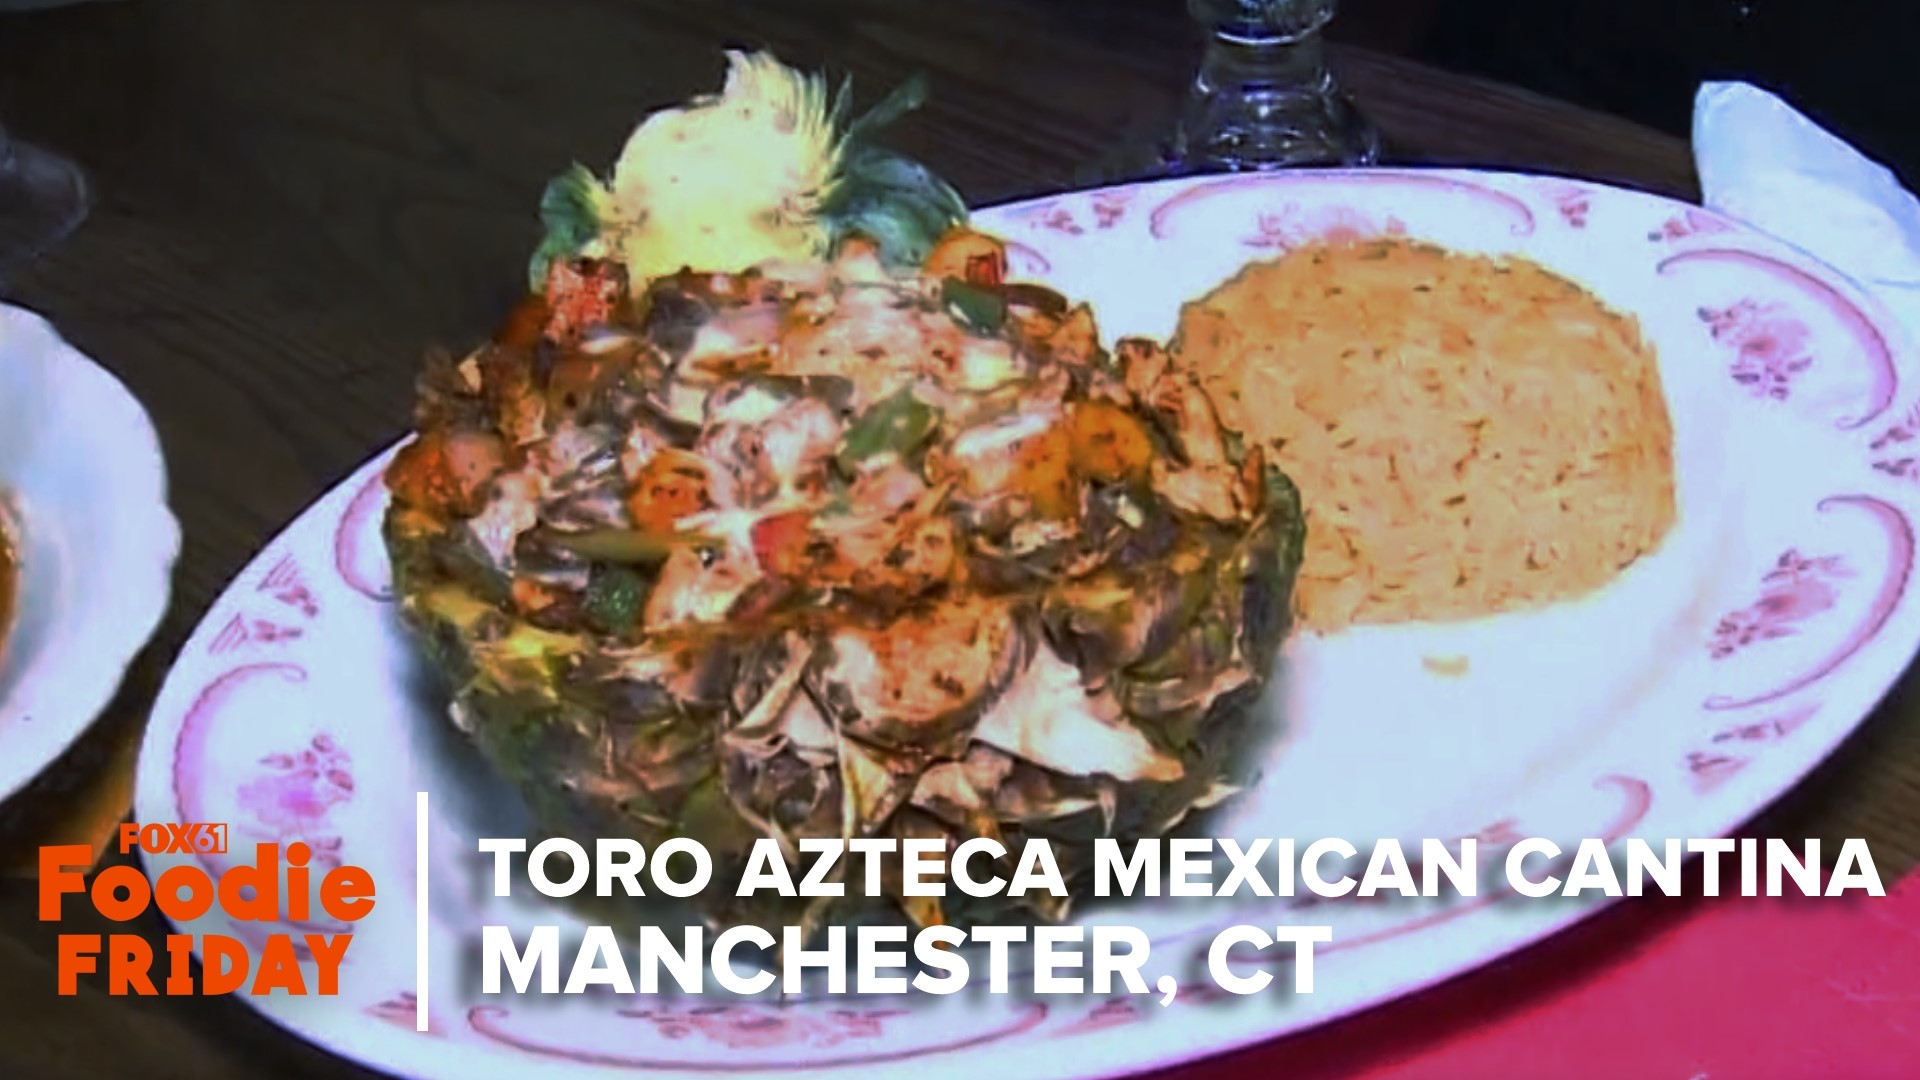 Symphonie Privett and Jenny Boom Boom sample the Mexican cuisine found at Toro Azteca Mexican Cantina in Manchester.